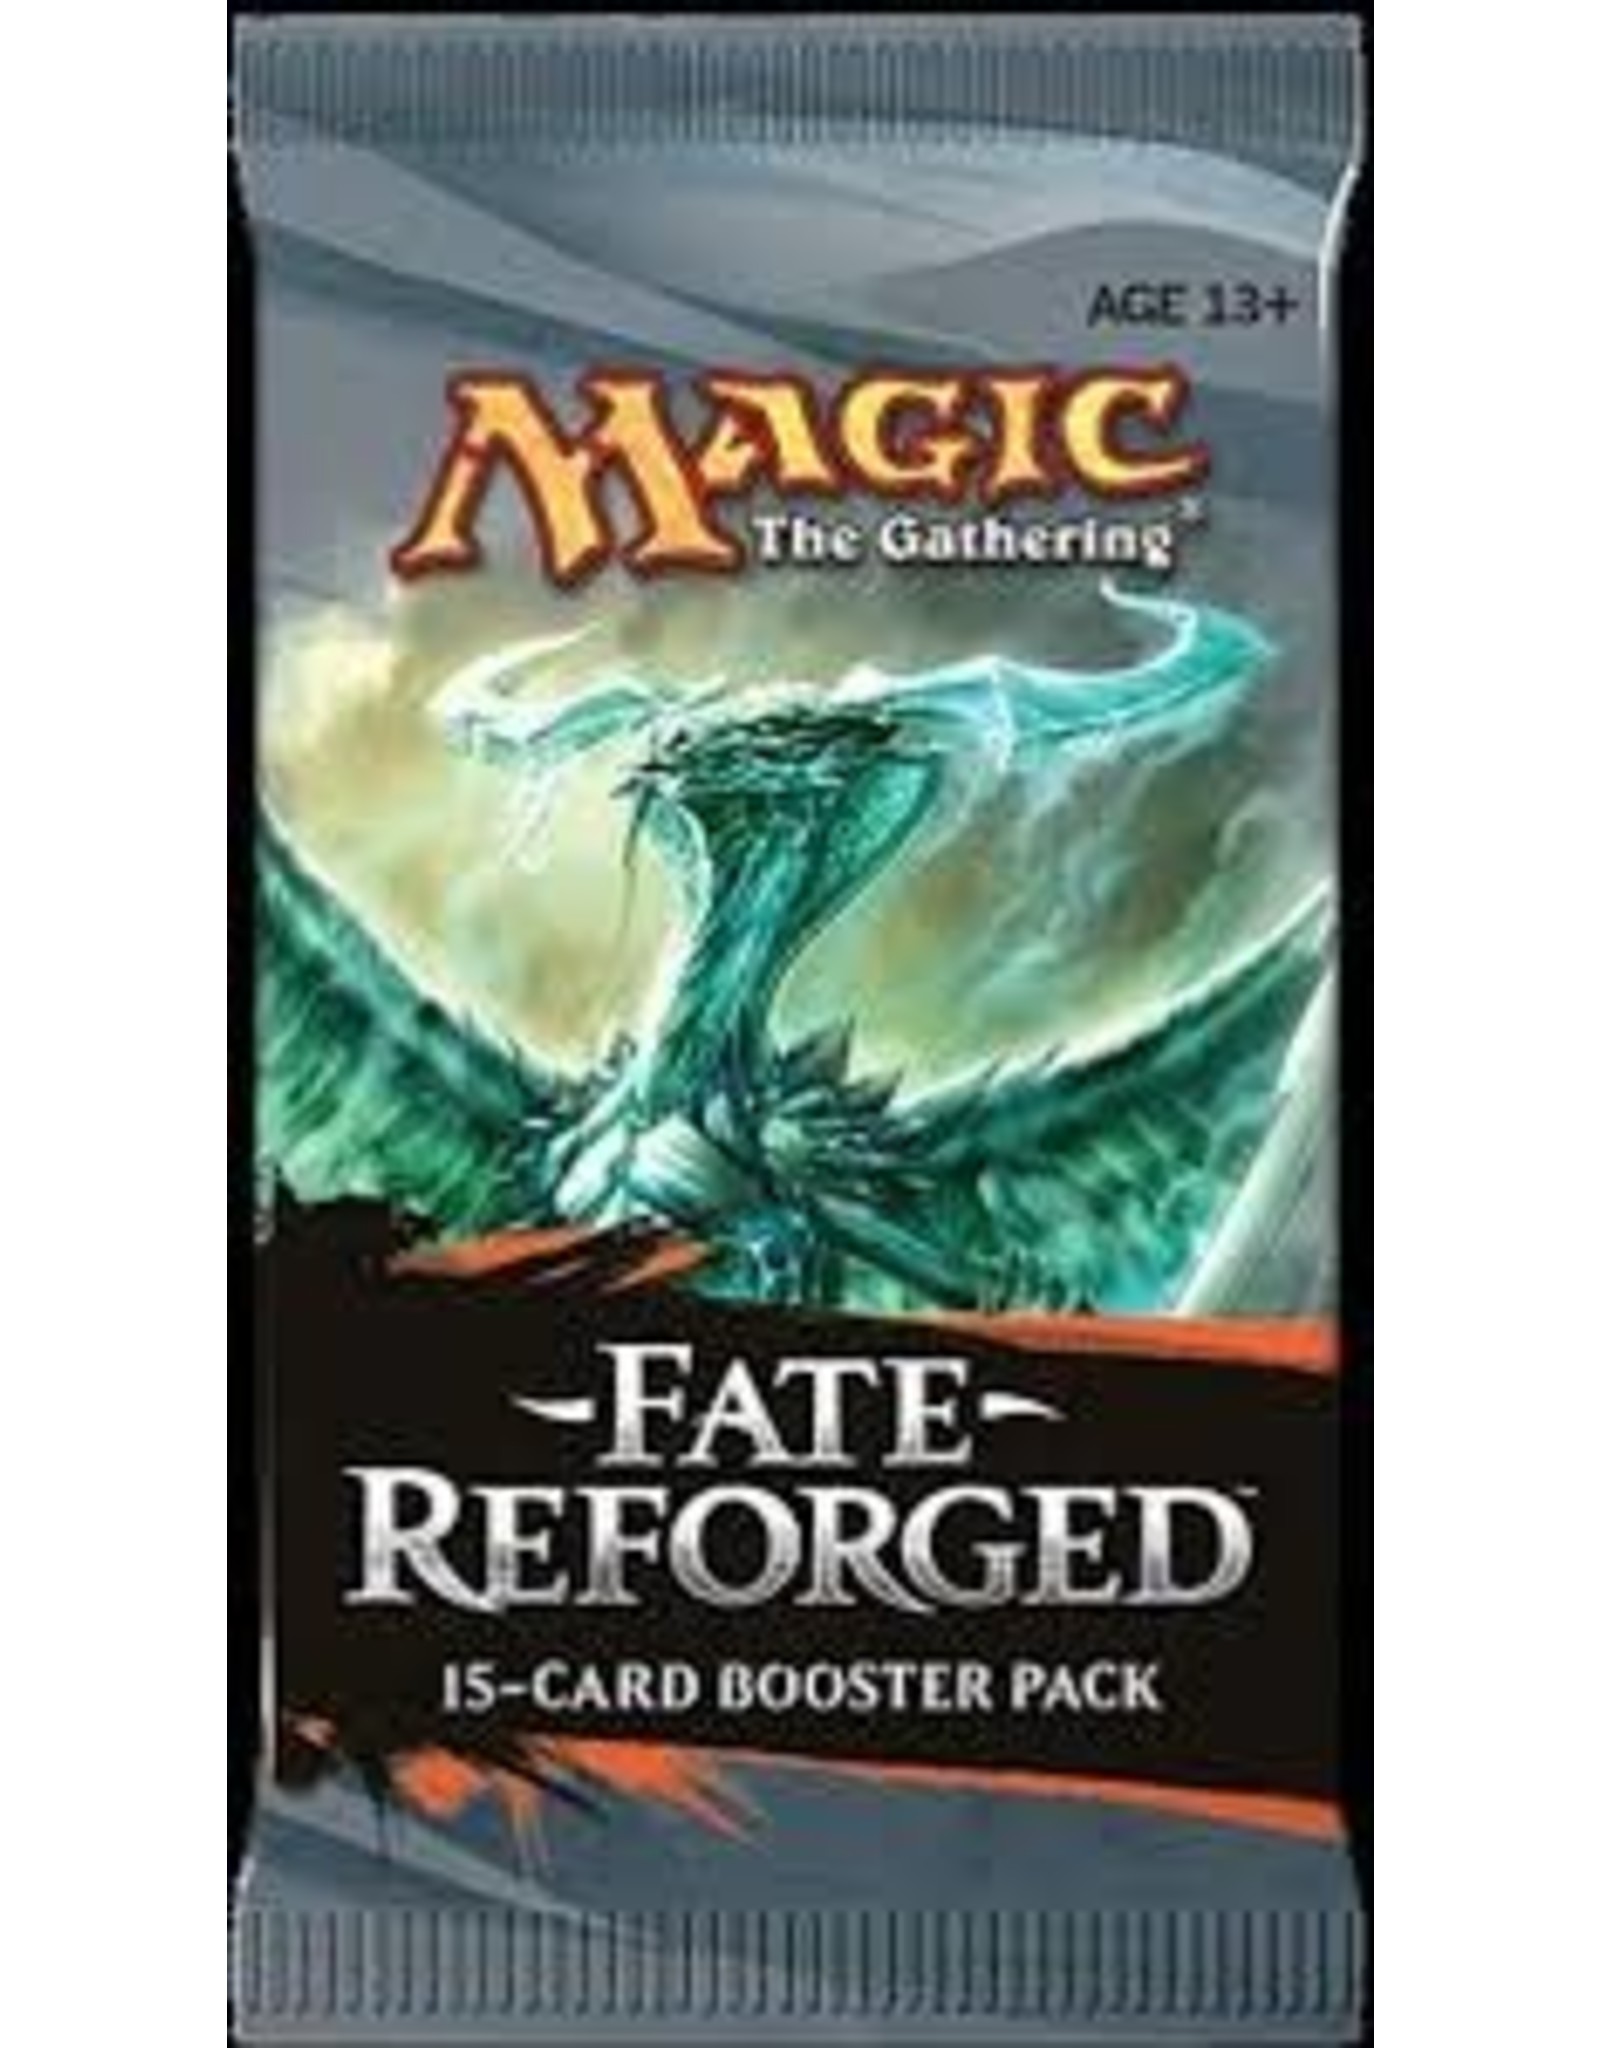 Wizards of the Coast Fate Reforged Booster Pack